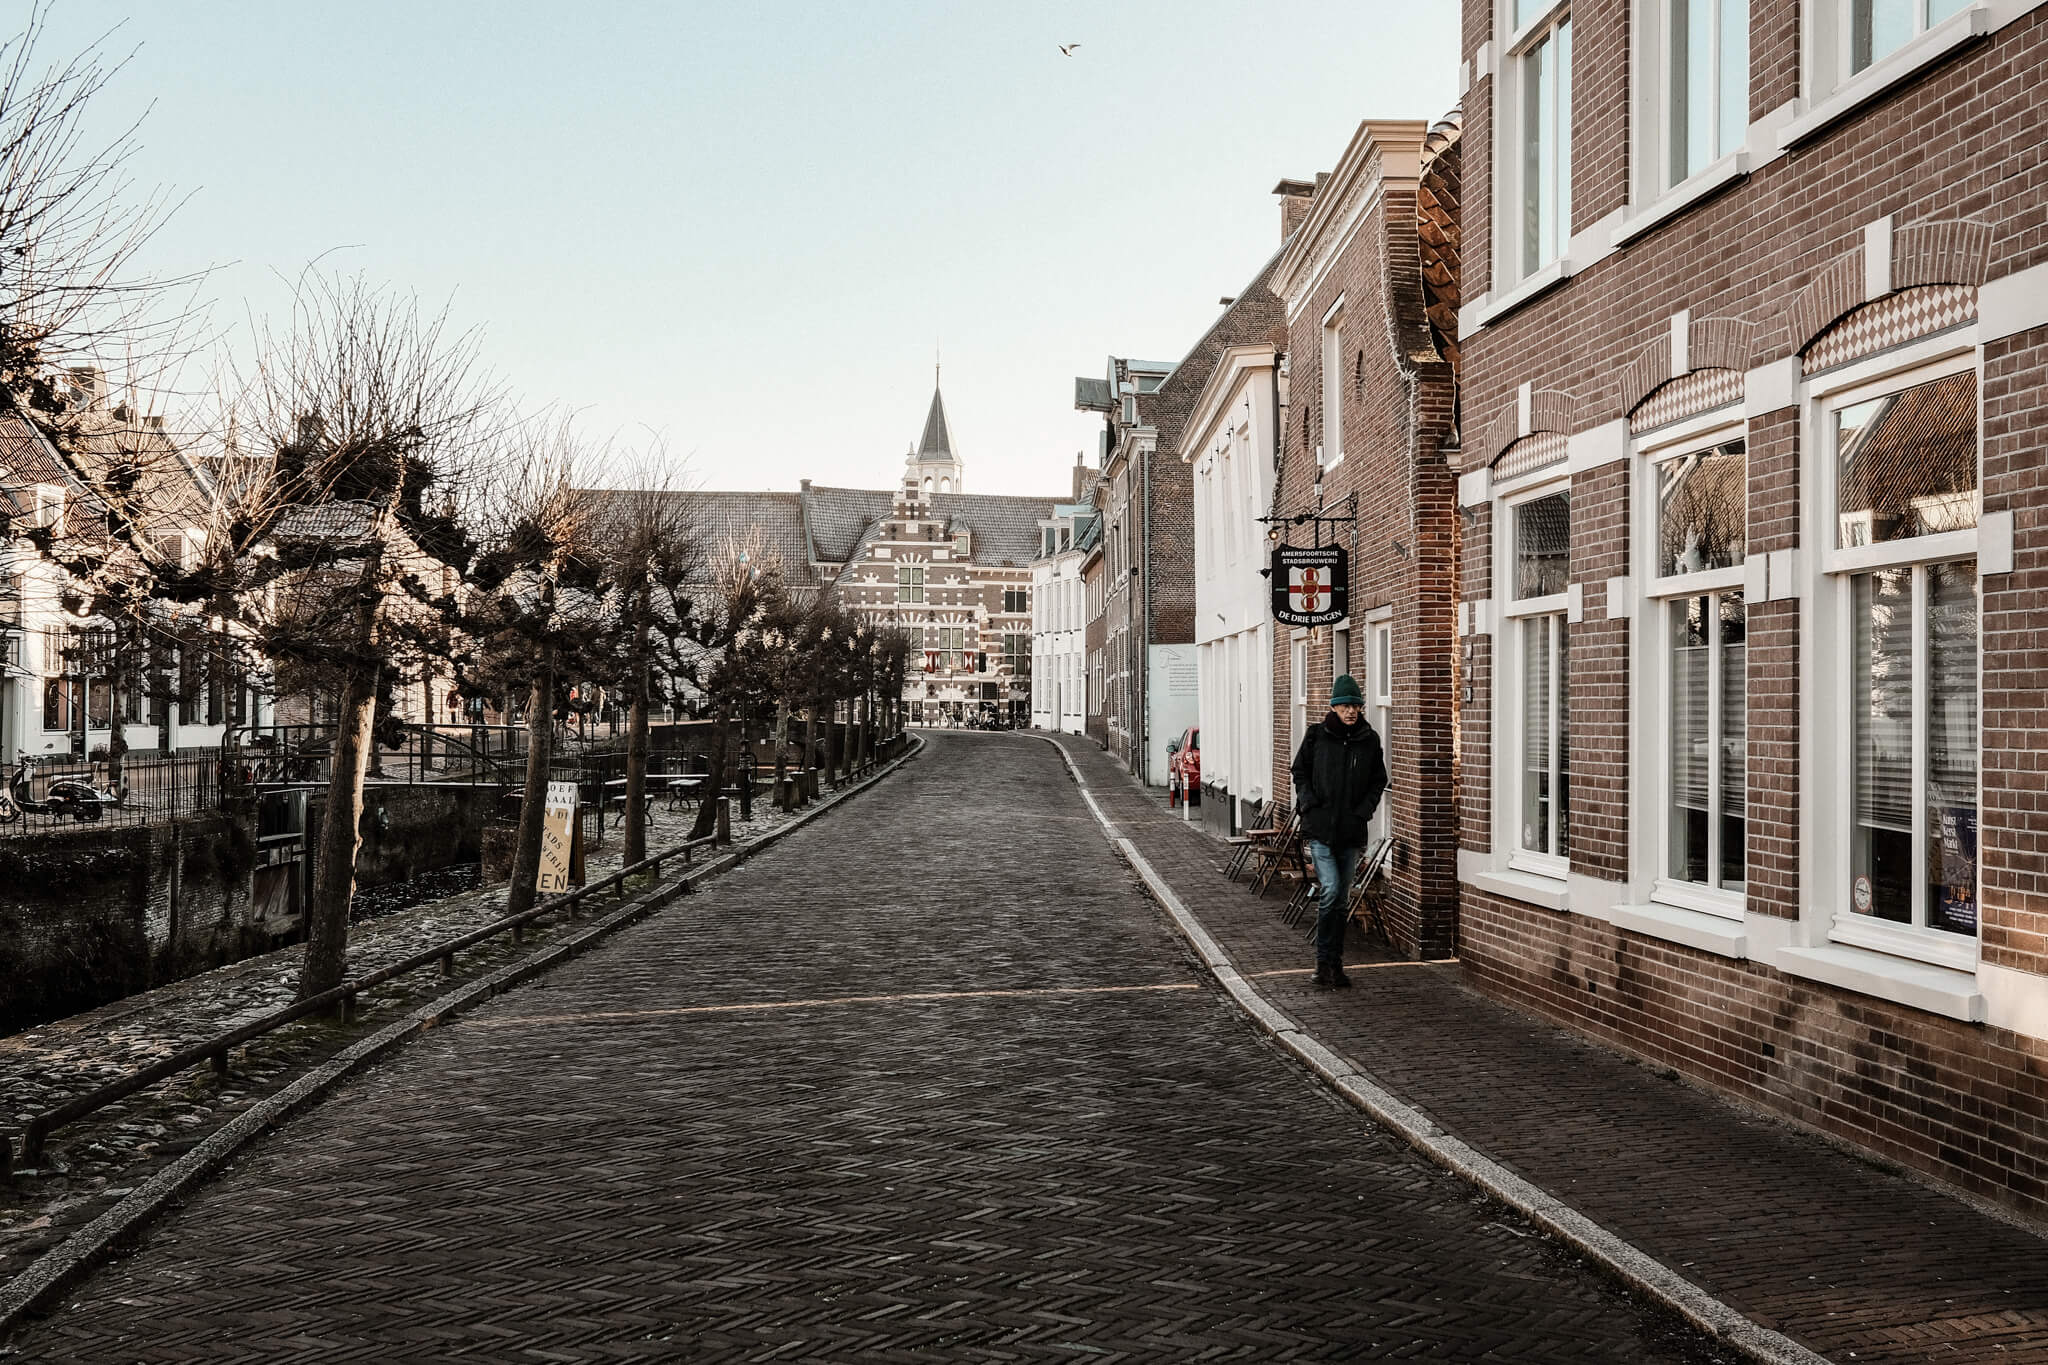 A man walking down the streets of the old city of Amersfoort